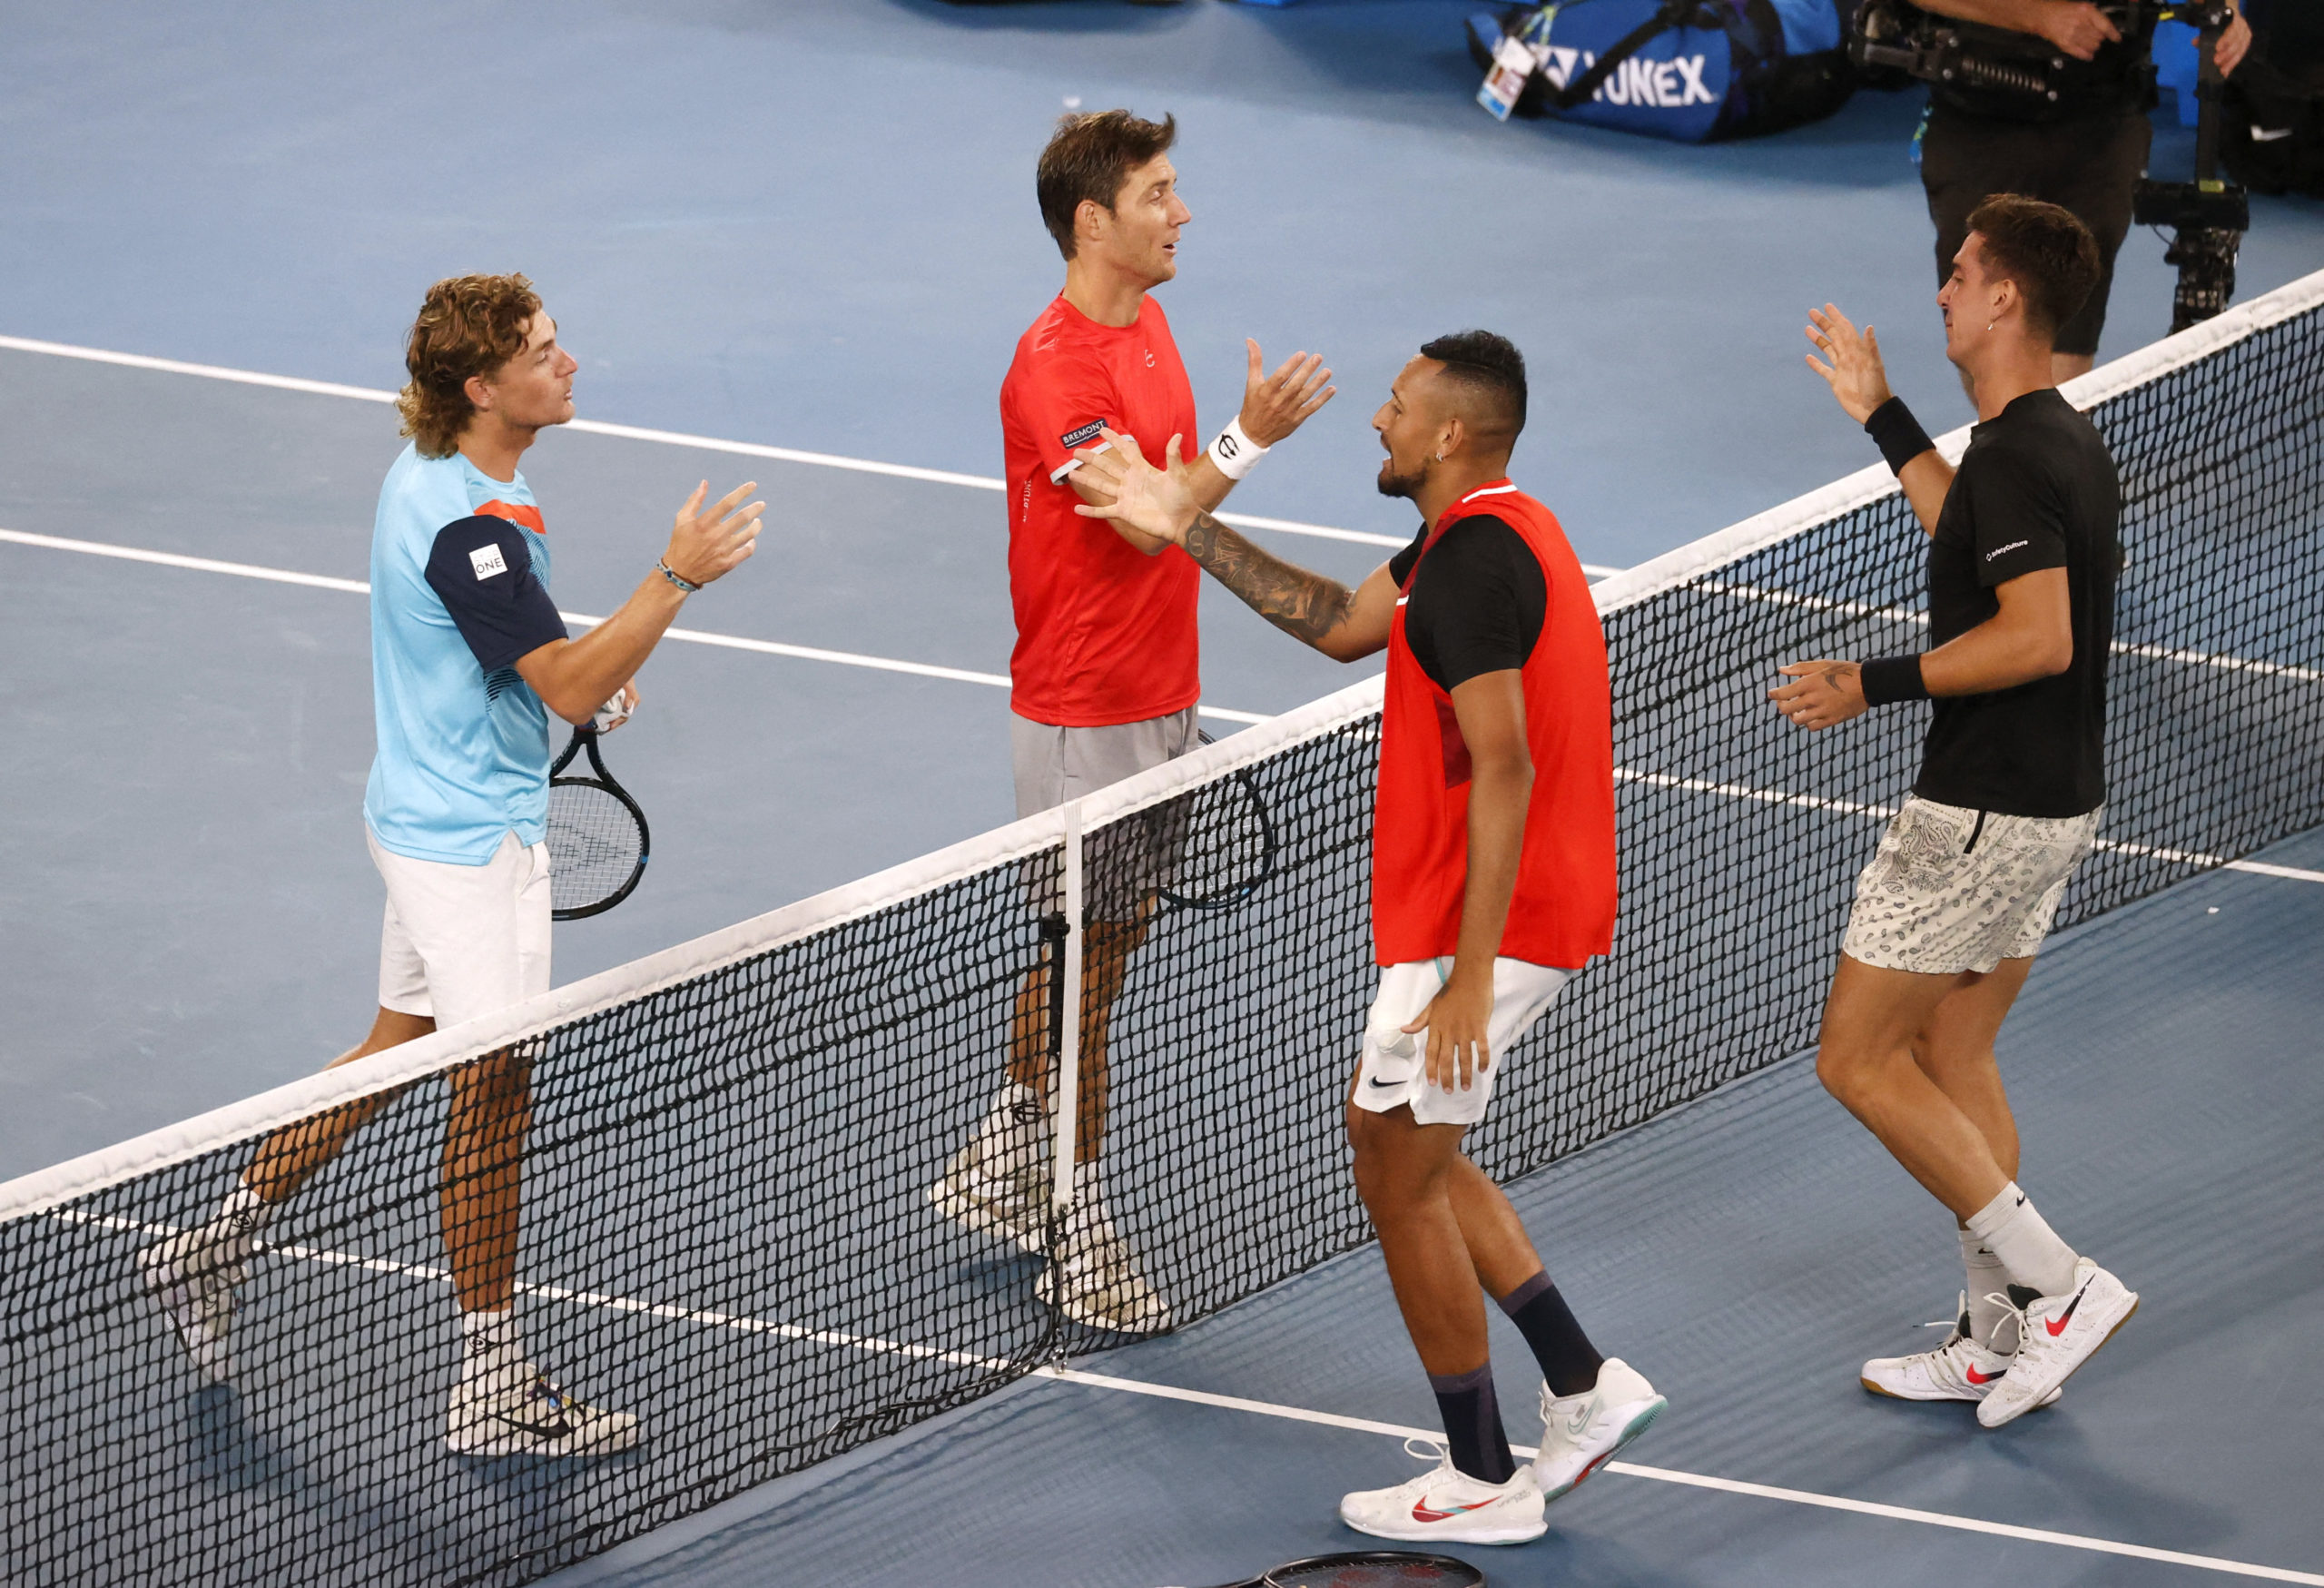 bles Final - Melbourne Park, Melbourne, Australia - January 29, 2022 Australia's Nick Kyrgios and Thanasi Kokkinakis shake hands with Australia's Matthew Ebden and Max Purcell after the final 